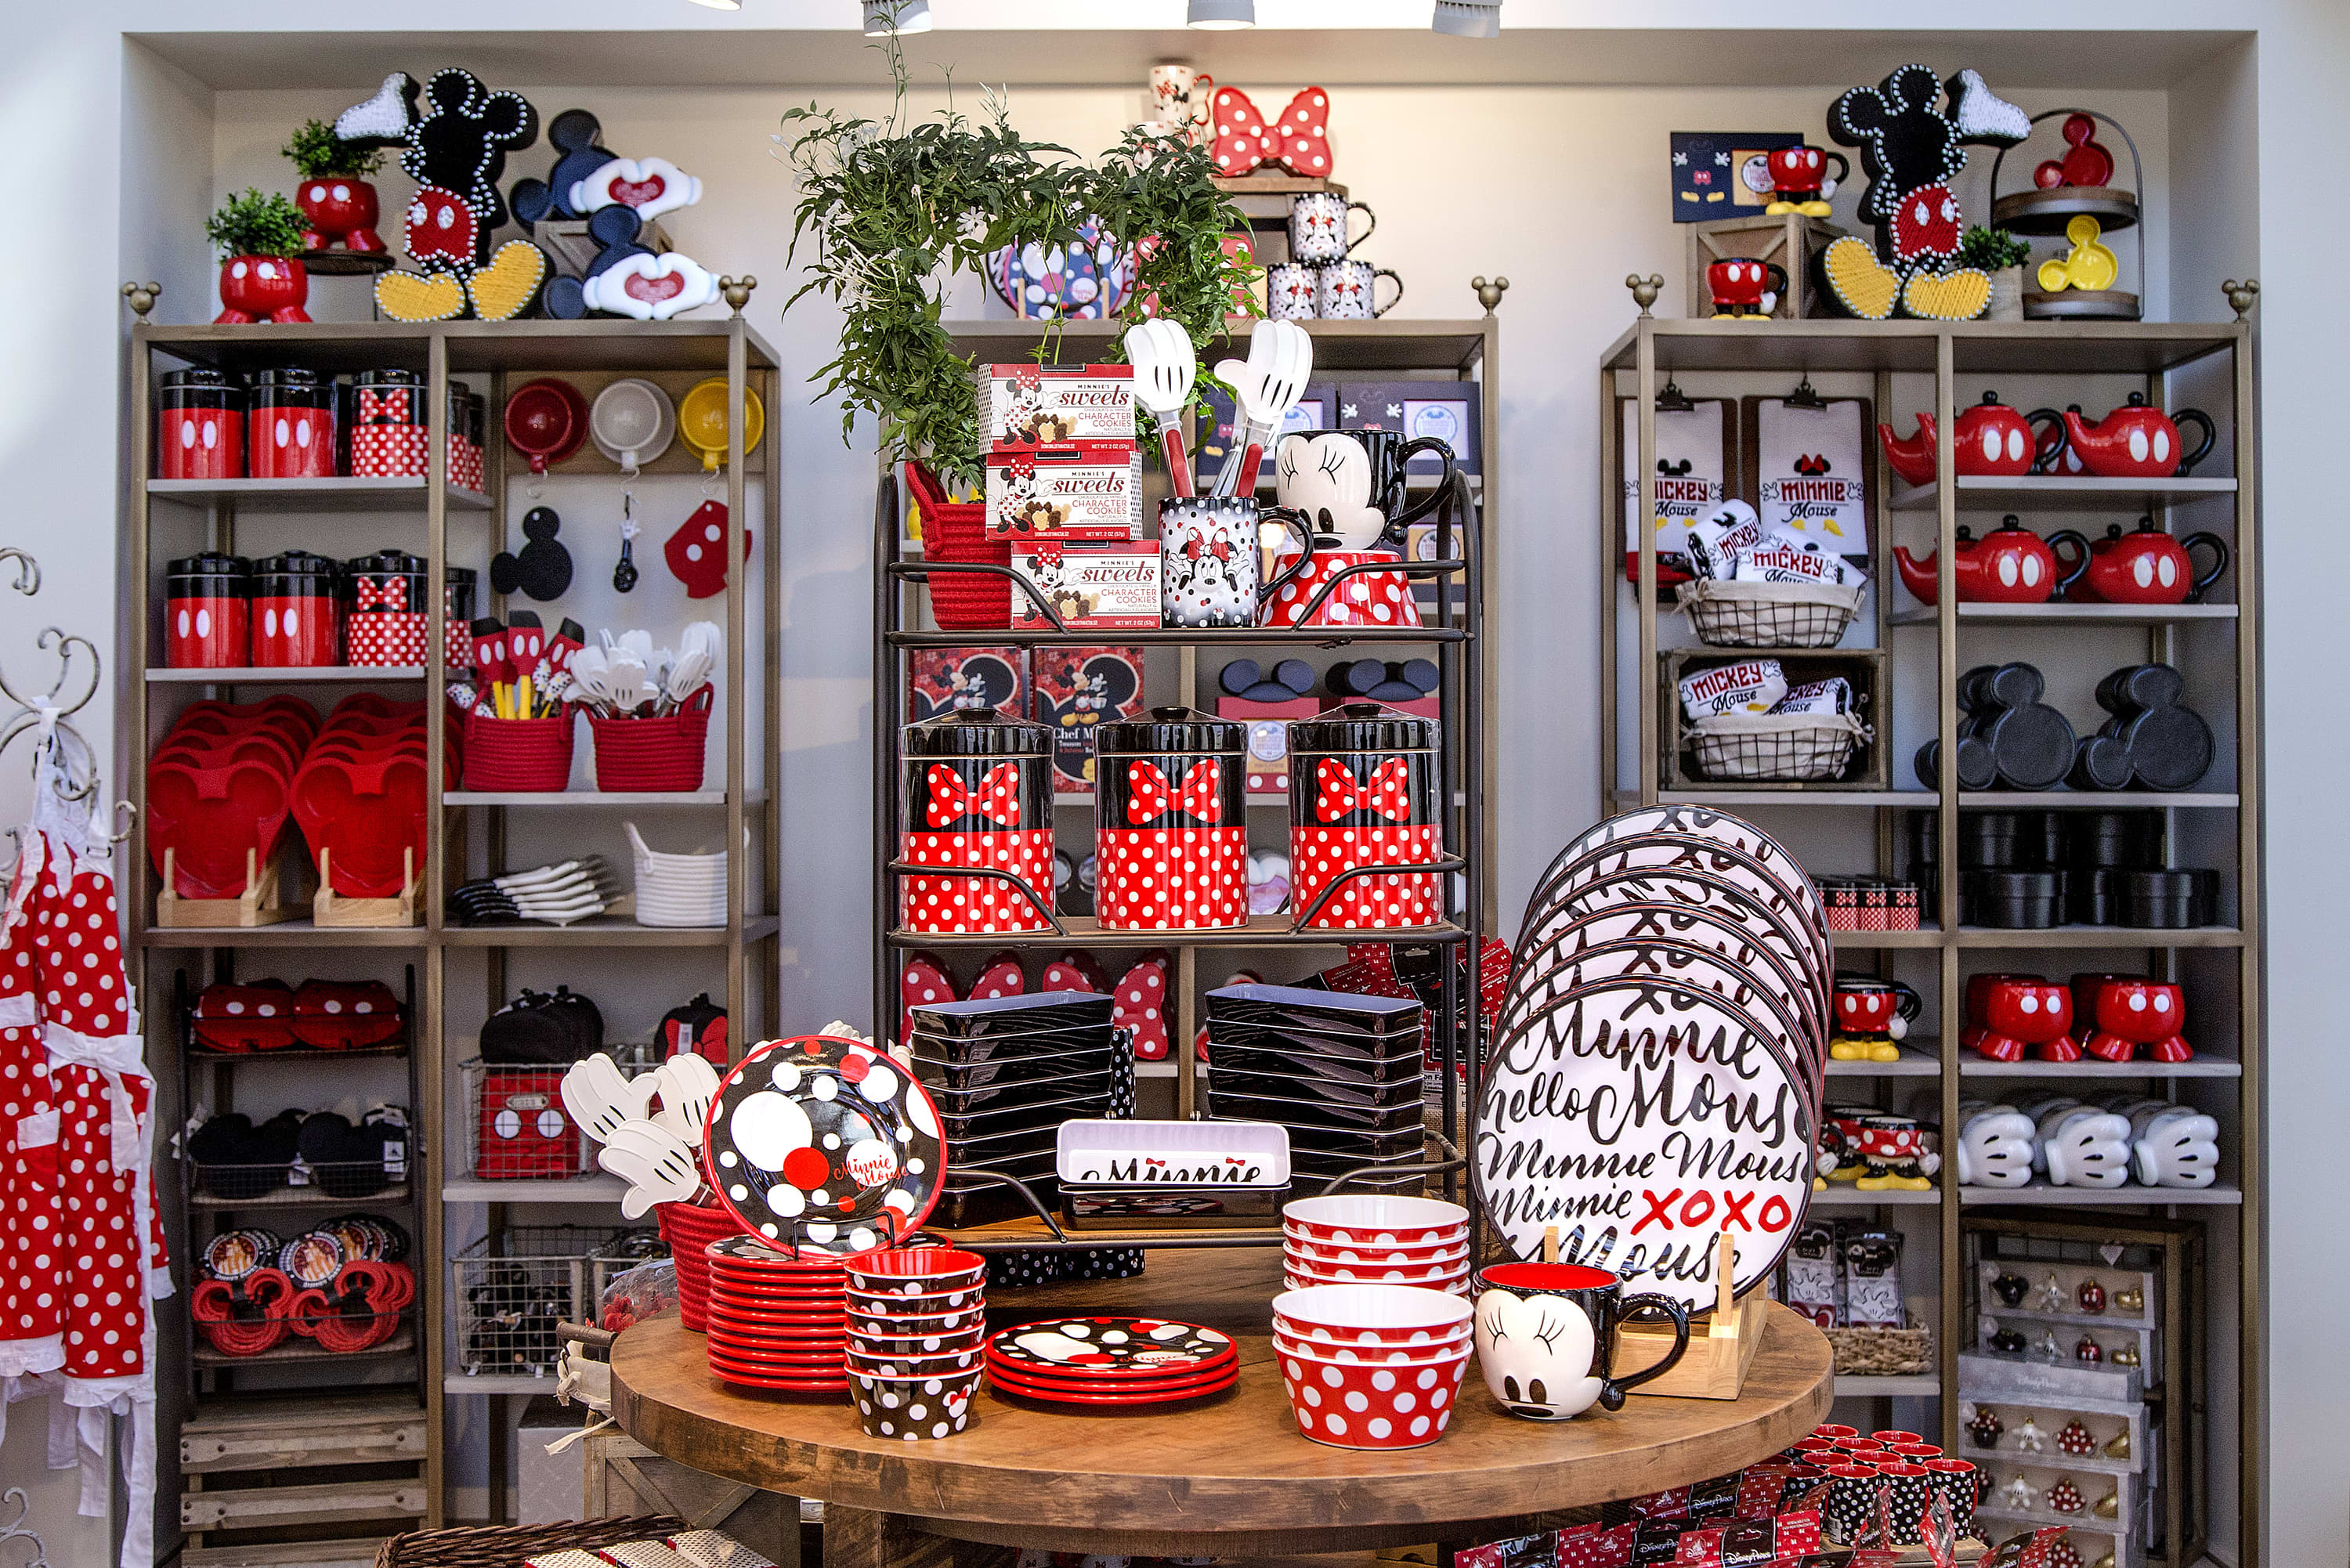 Look at these cool Disney kitchen - Ontario Grocery Outlet